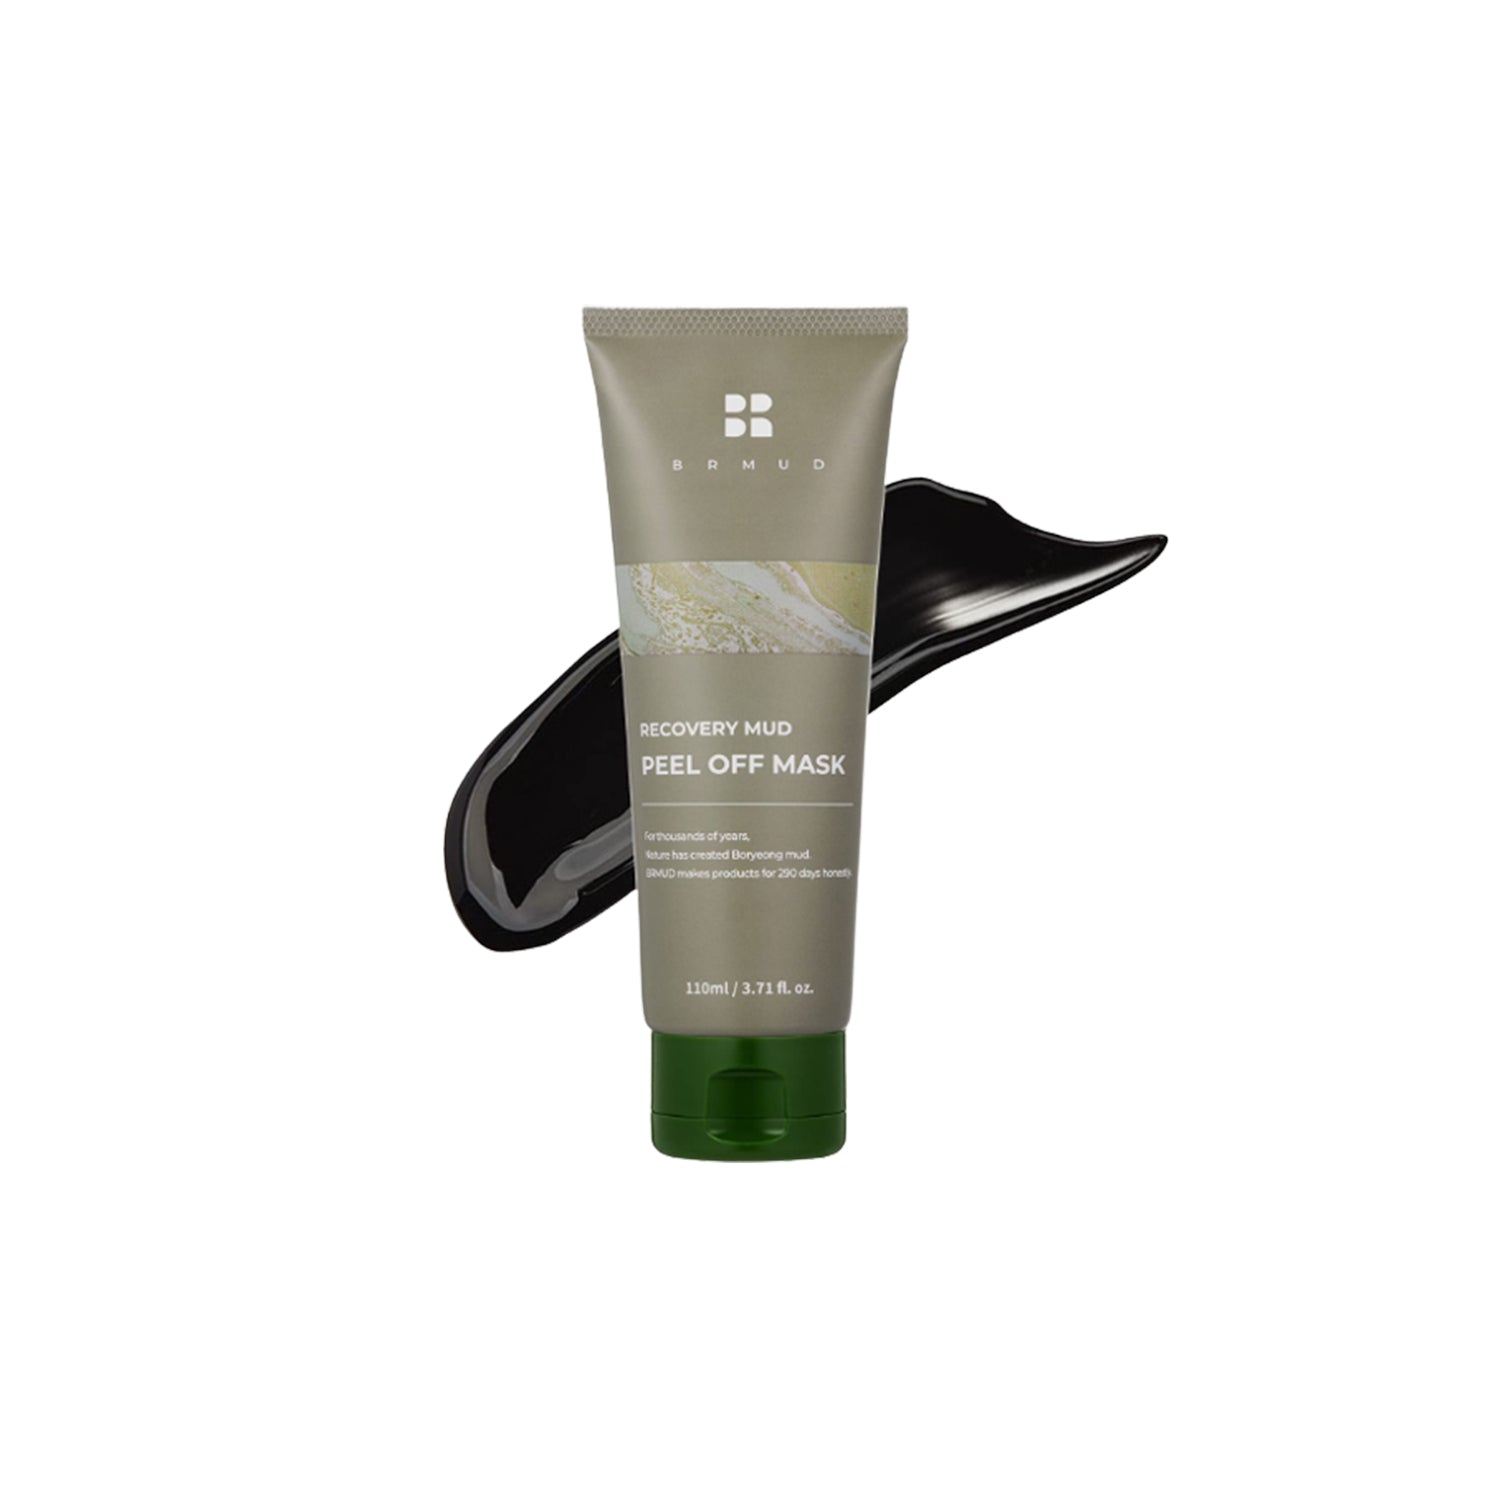 Recovery Mud Peel Off Mask